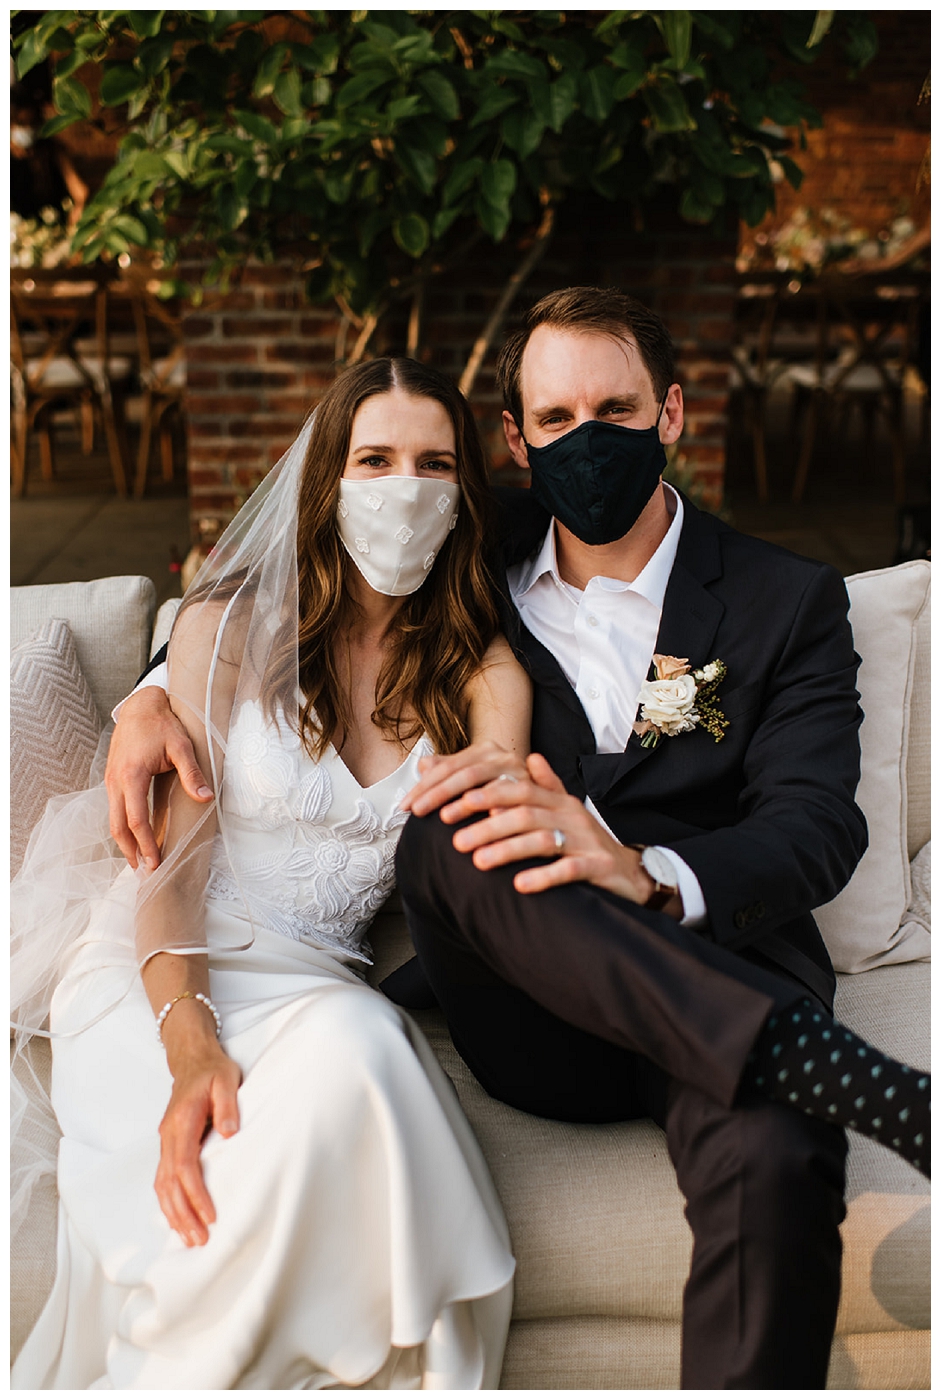 bride and groom posing together in masks cuddle up on a couch, groom wearing a boutonniere, del mar surf station, farmhouse table, budvases ,outdoor reception, medium sized centerpieces, romantic weddings, daisies, toffee roses, berries, cream flowers, white flowers, hydrangeas, majolica roses, explosion grass, outdoor wedding, covid wedding, san diego wedding florist, southern california elopement florist, socal florist, best wedding florist san diego ca, best wedding florist southern california, los angeles wedding florist, top rated wedding florist in california, del mar san diego, blush tapered candles, blush table runner, budvases